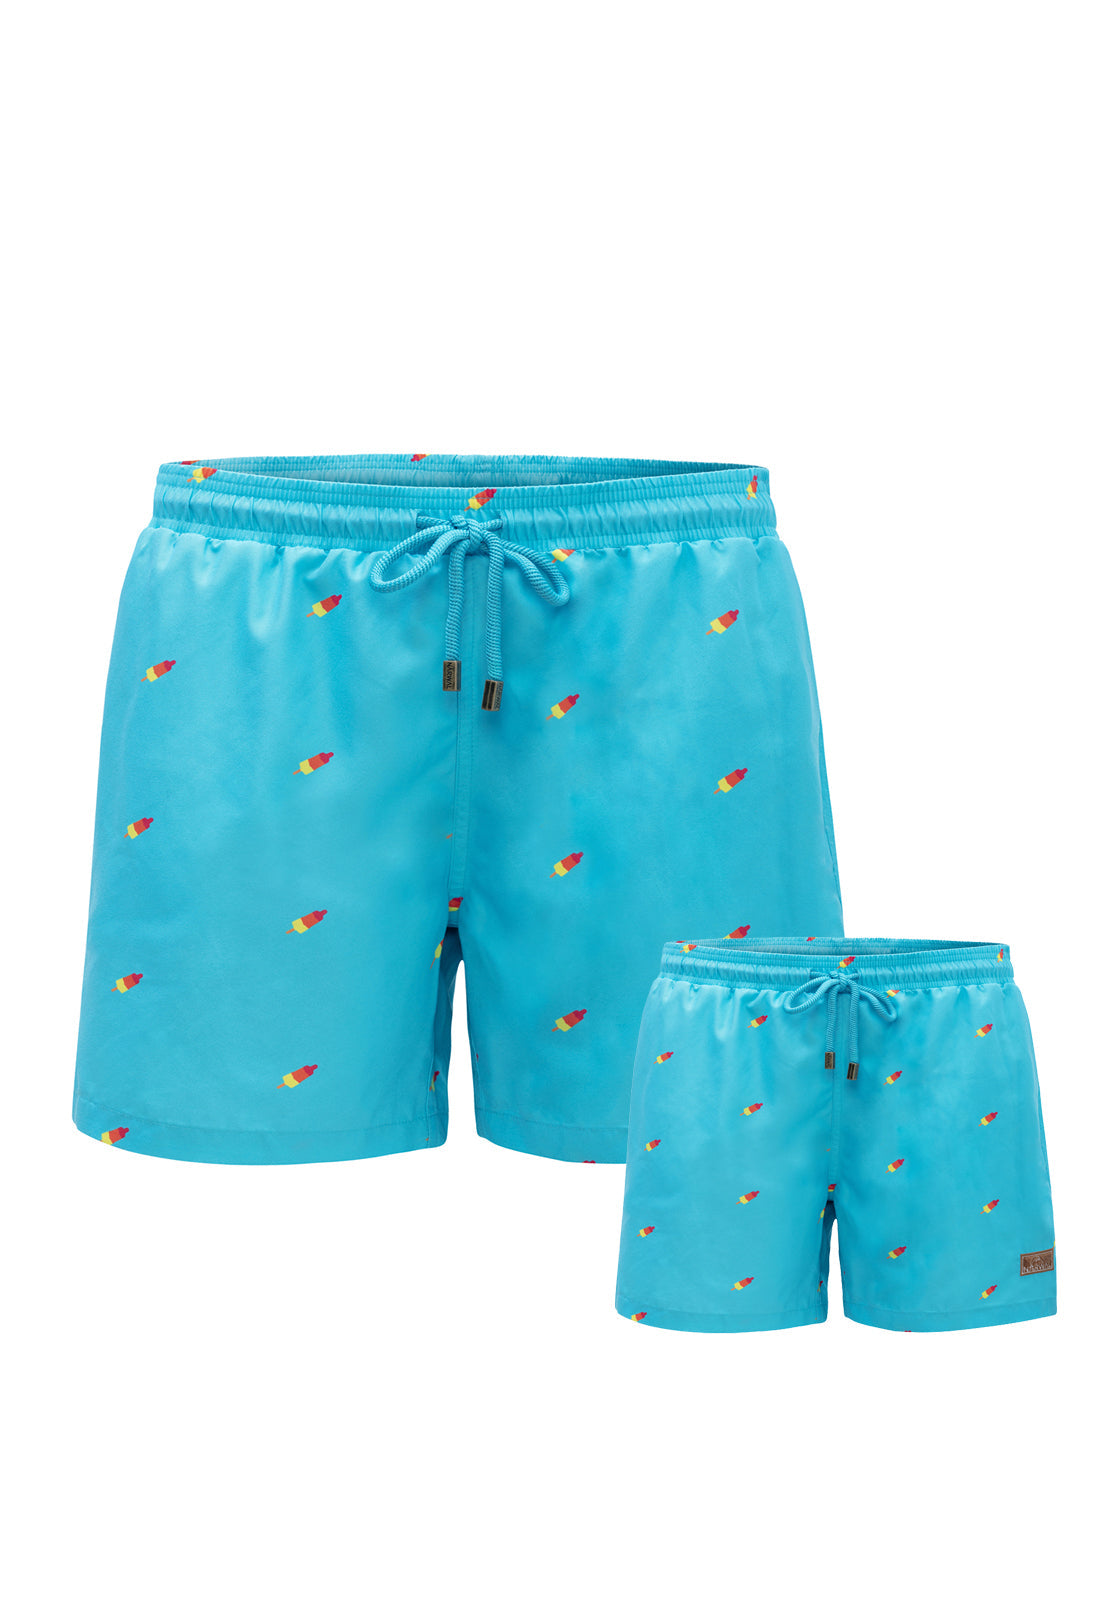 Icelolly Vader & Zoon Swim Trunks Bundle